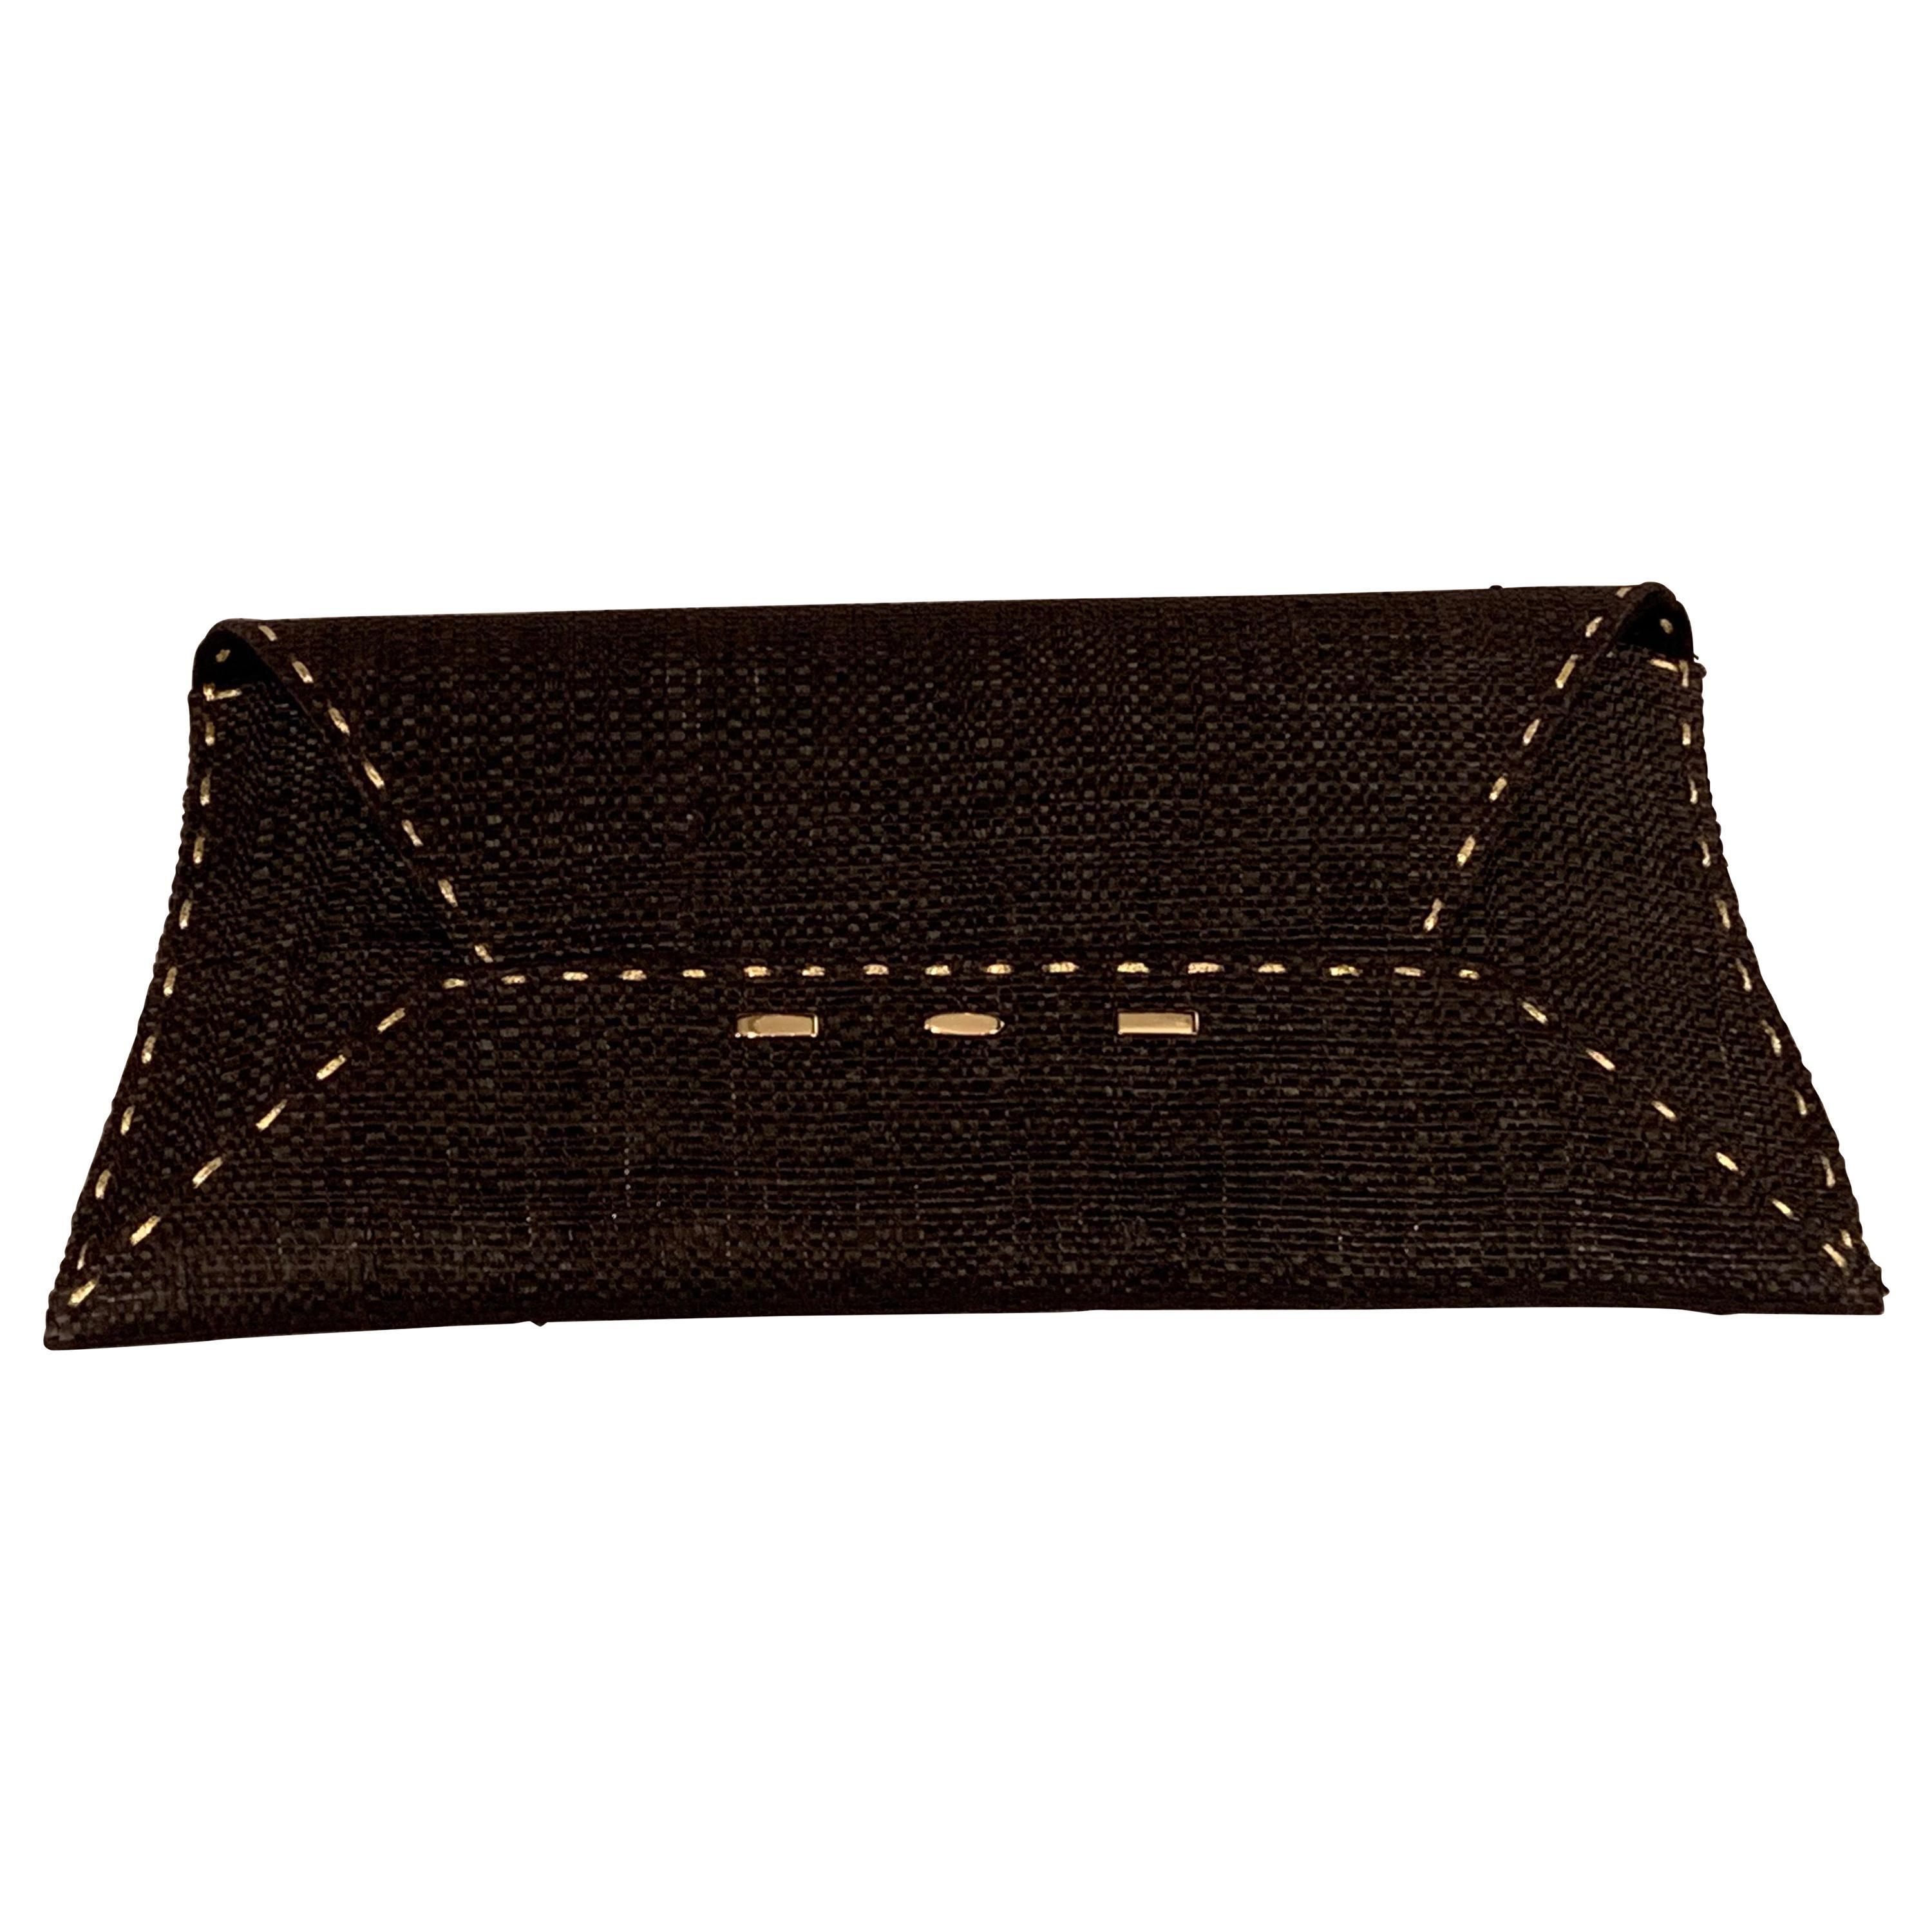 VBH Manila Clutch Black Woven Straw with Gold Accents